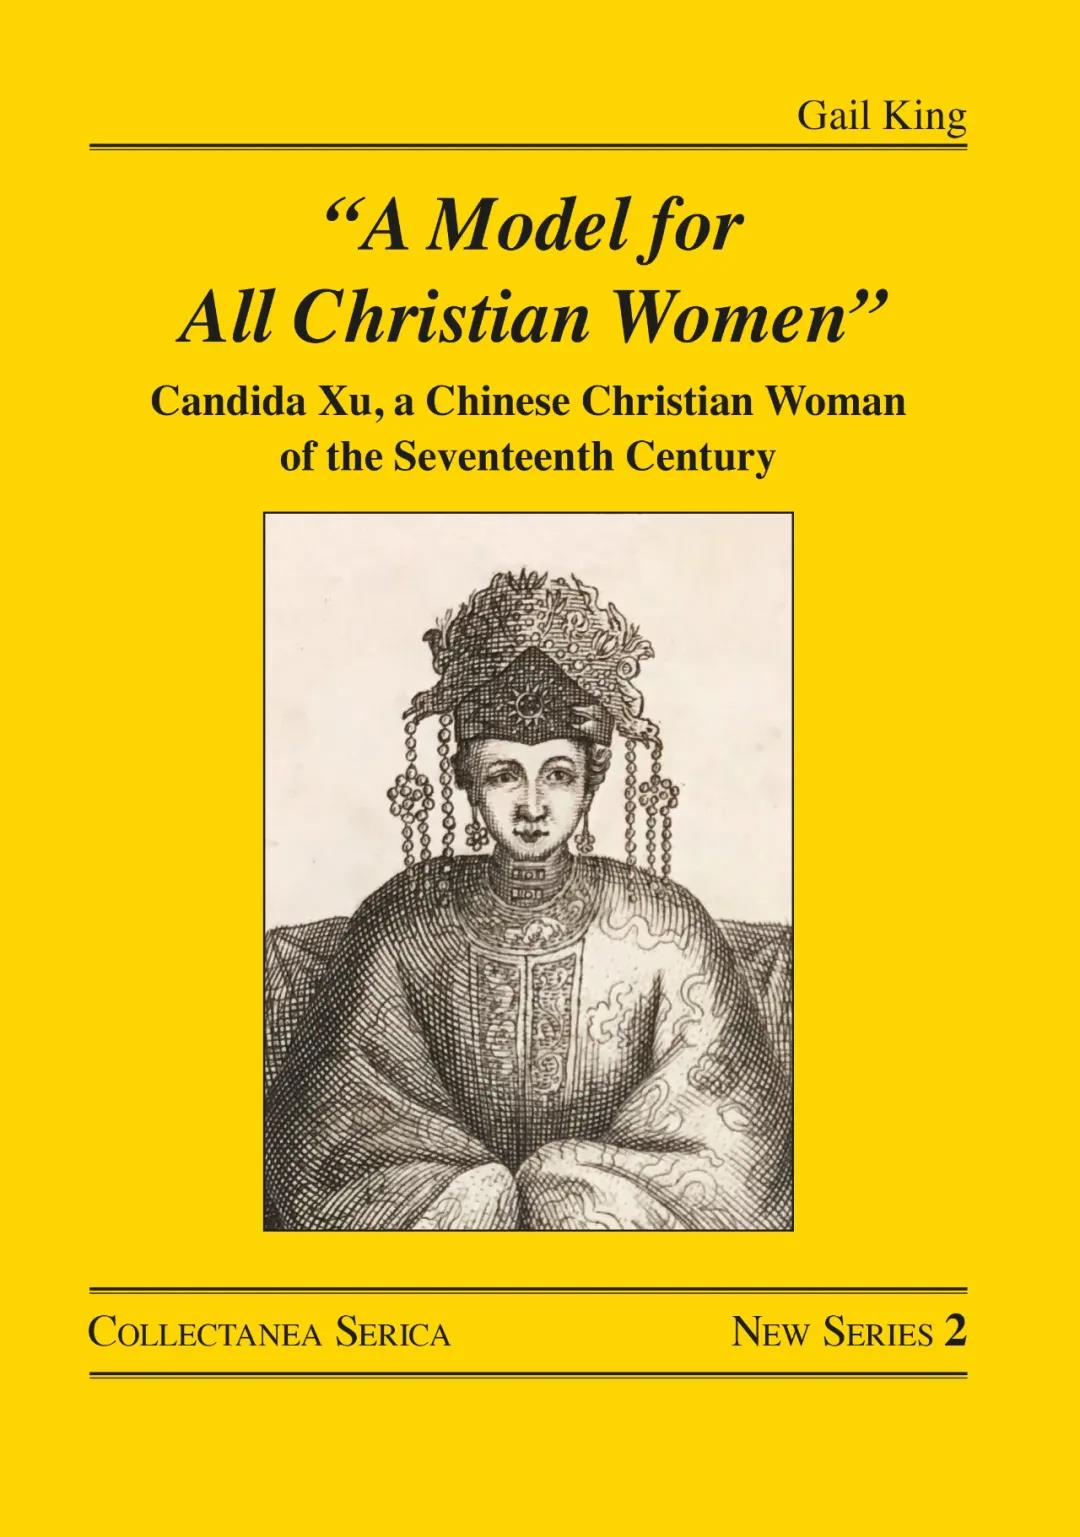 Gail King, A Model for All Christian Women: Candida Xu, a Chinese Christian Woman of the Seventeenth Century (2020)